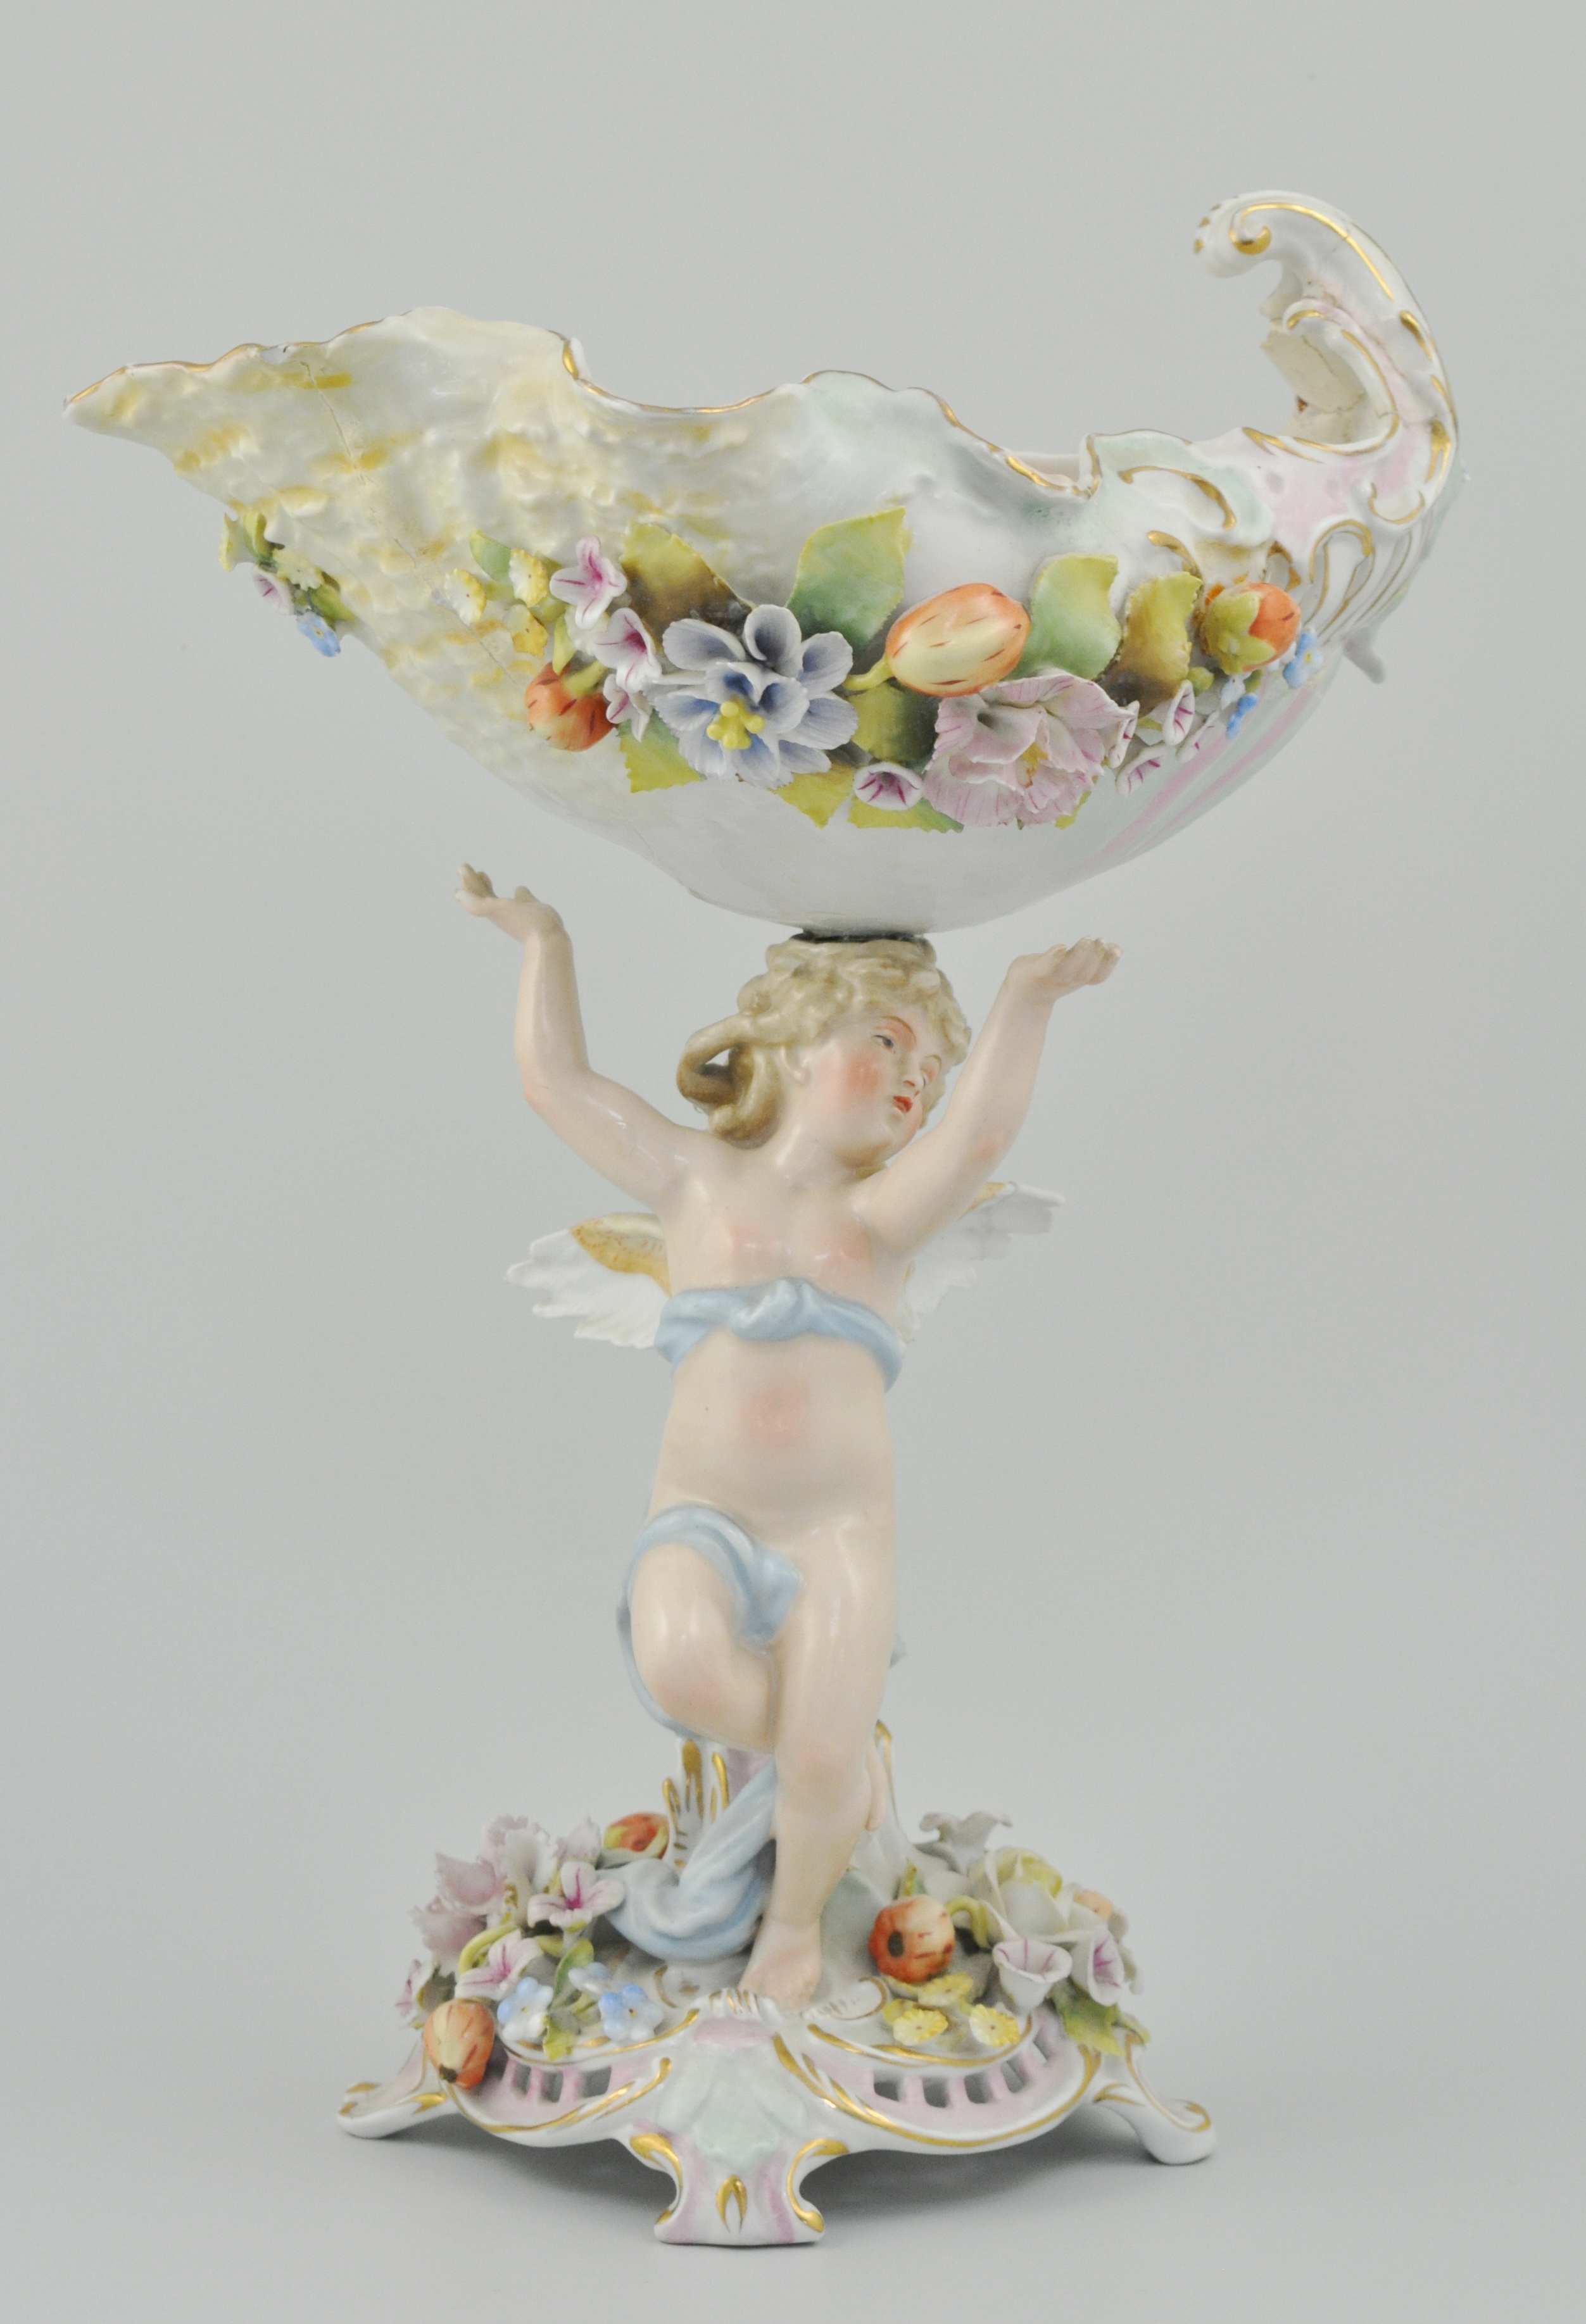 Sitzendorf porcelain comport, a shell mounted bowl supported by a cherub, encrusted decoration,